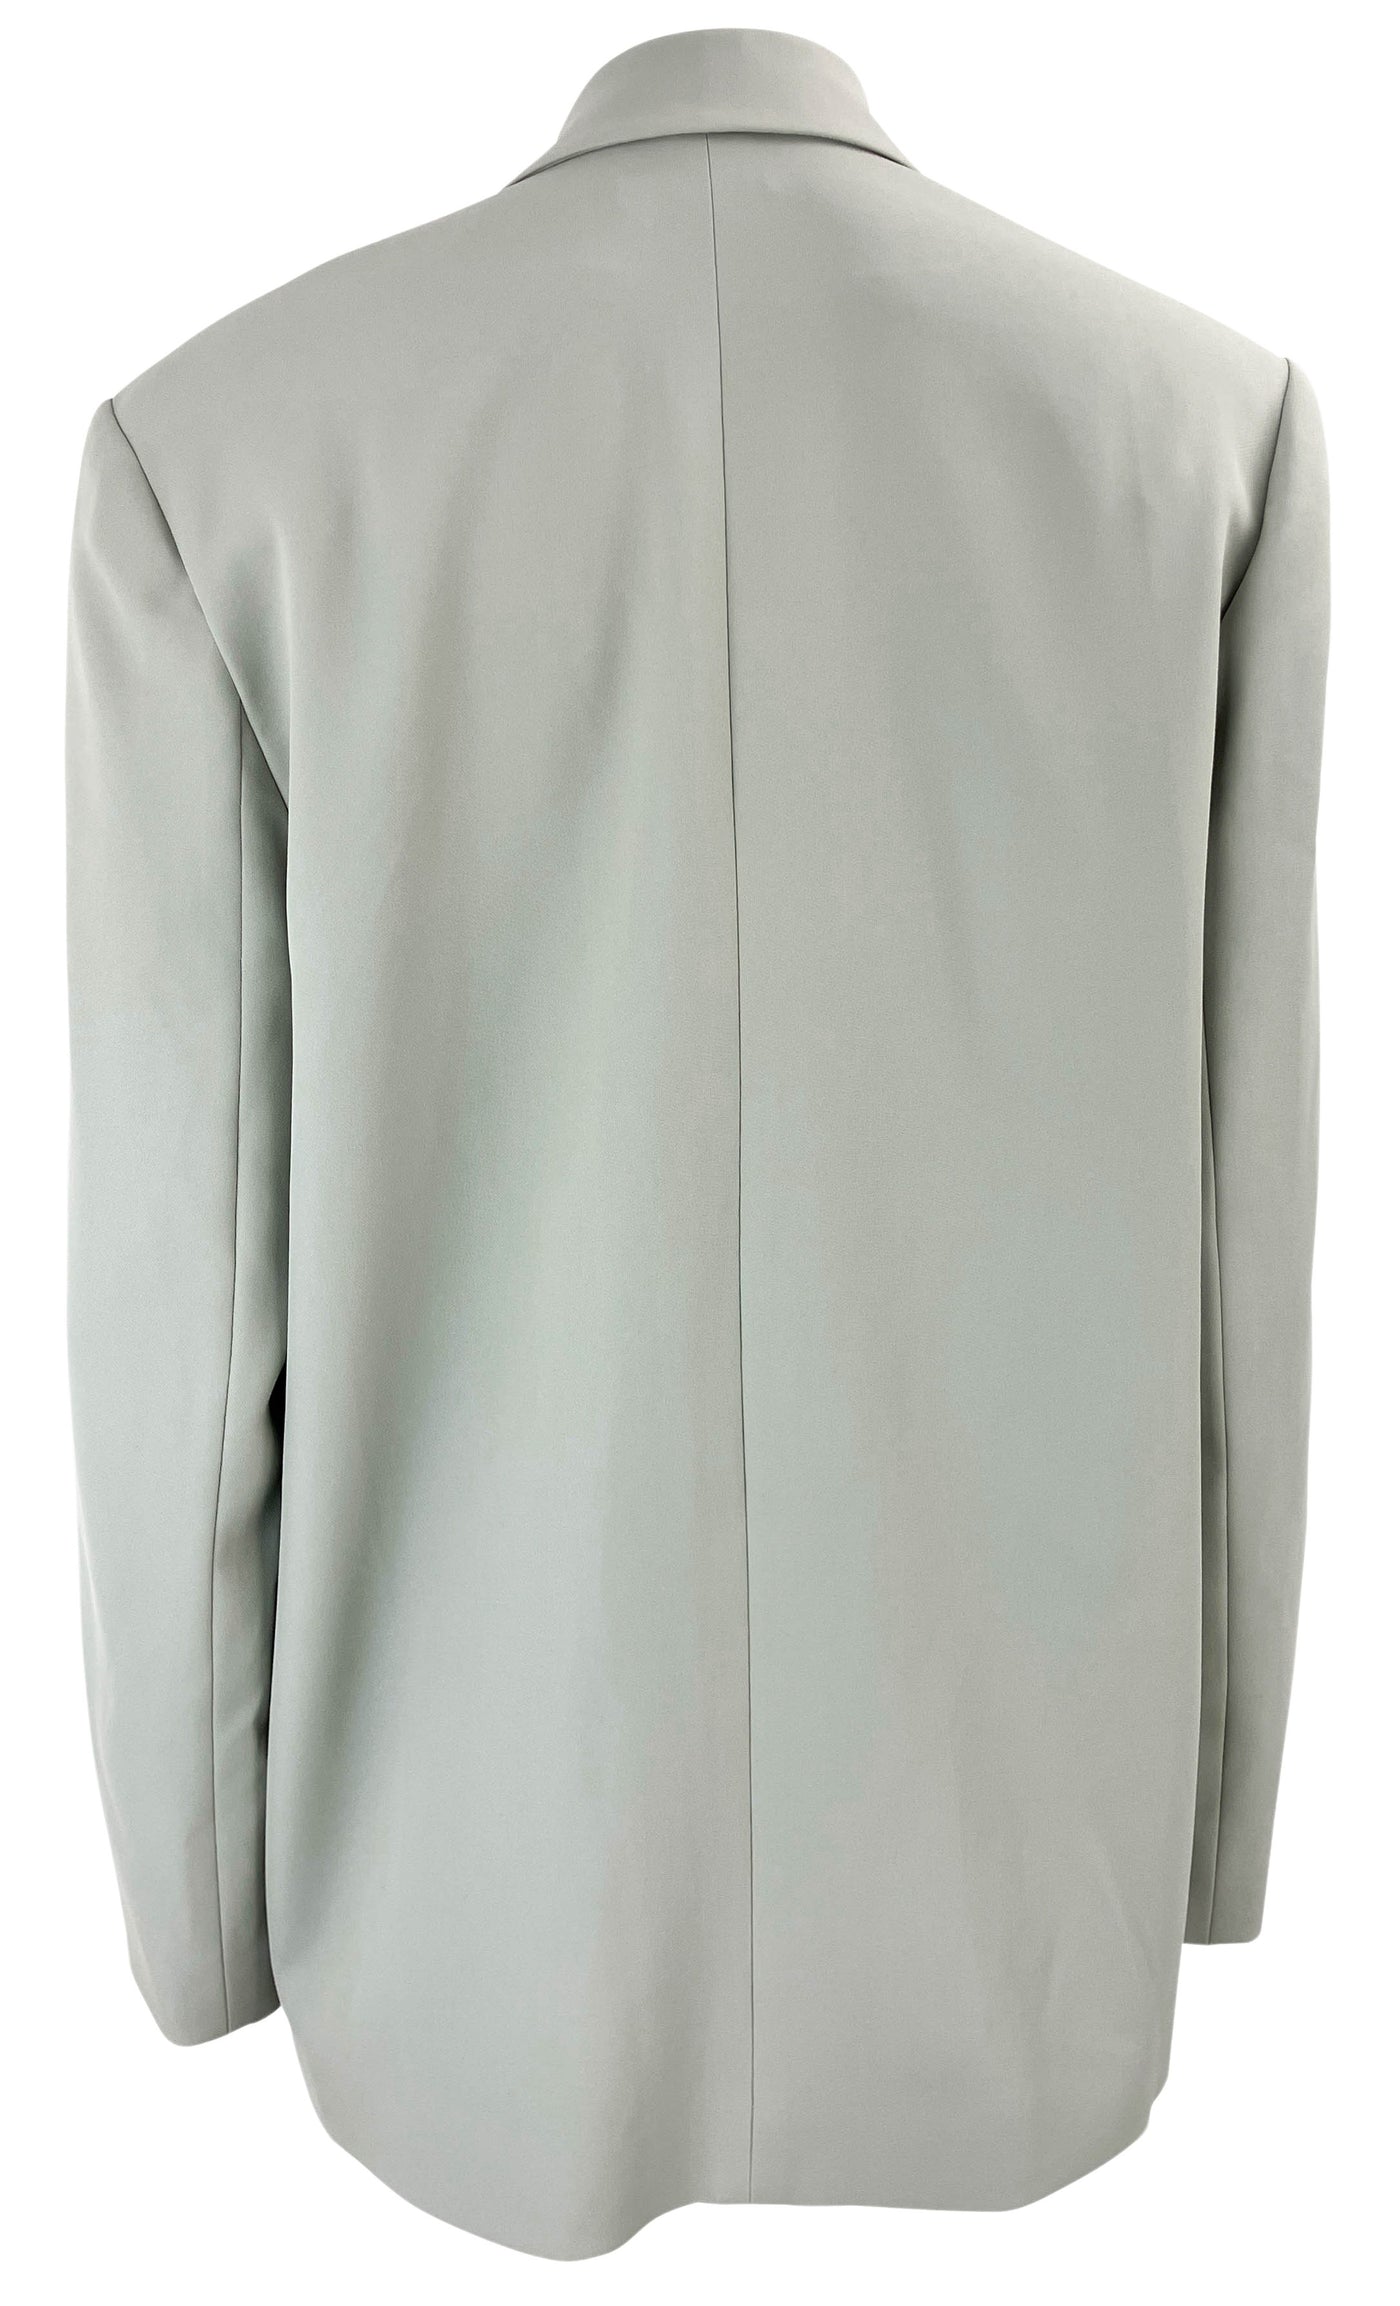 The Sei Oversized Blazer in Sage Green - Discounts on The Sei at UAL